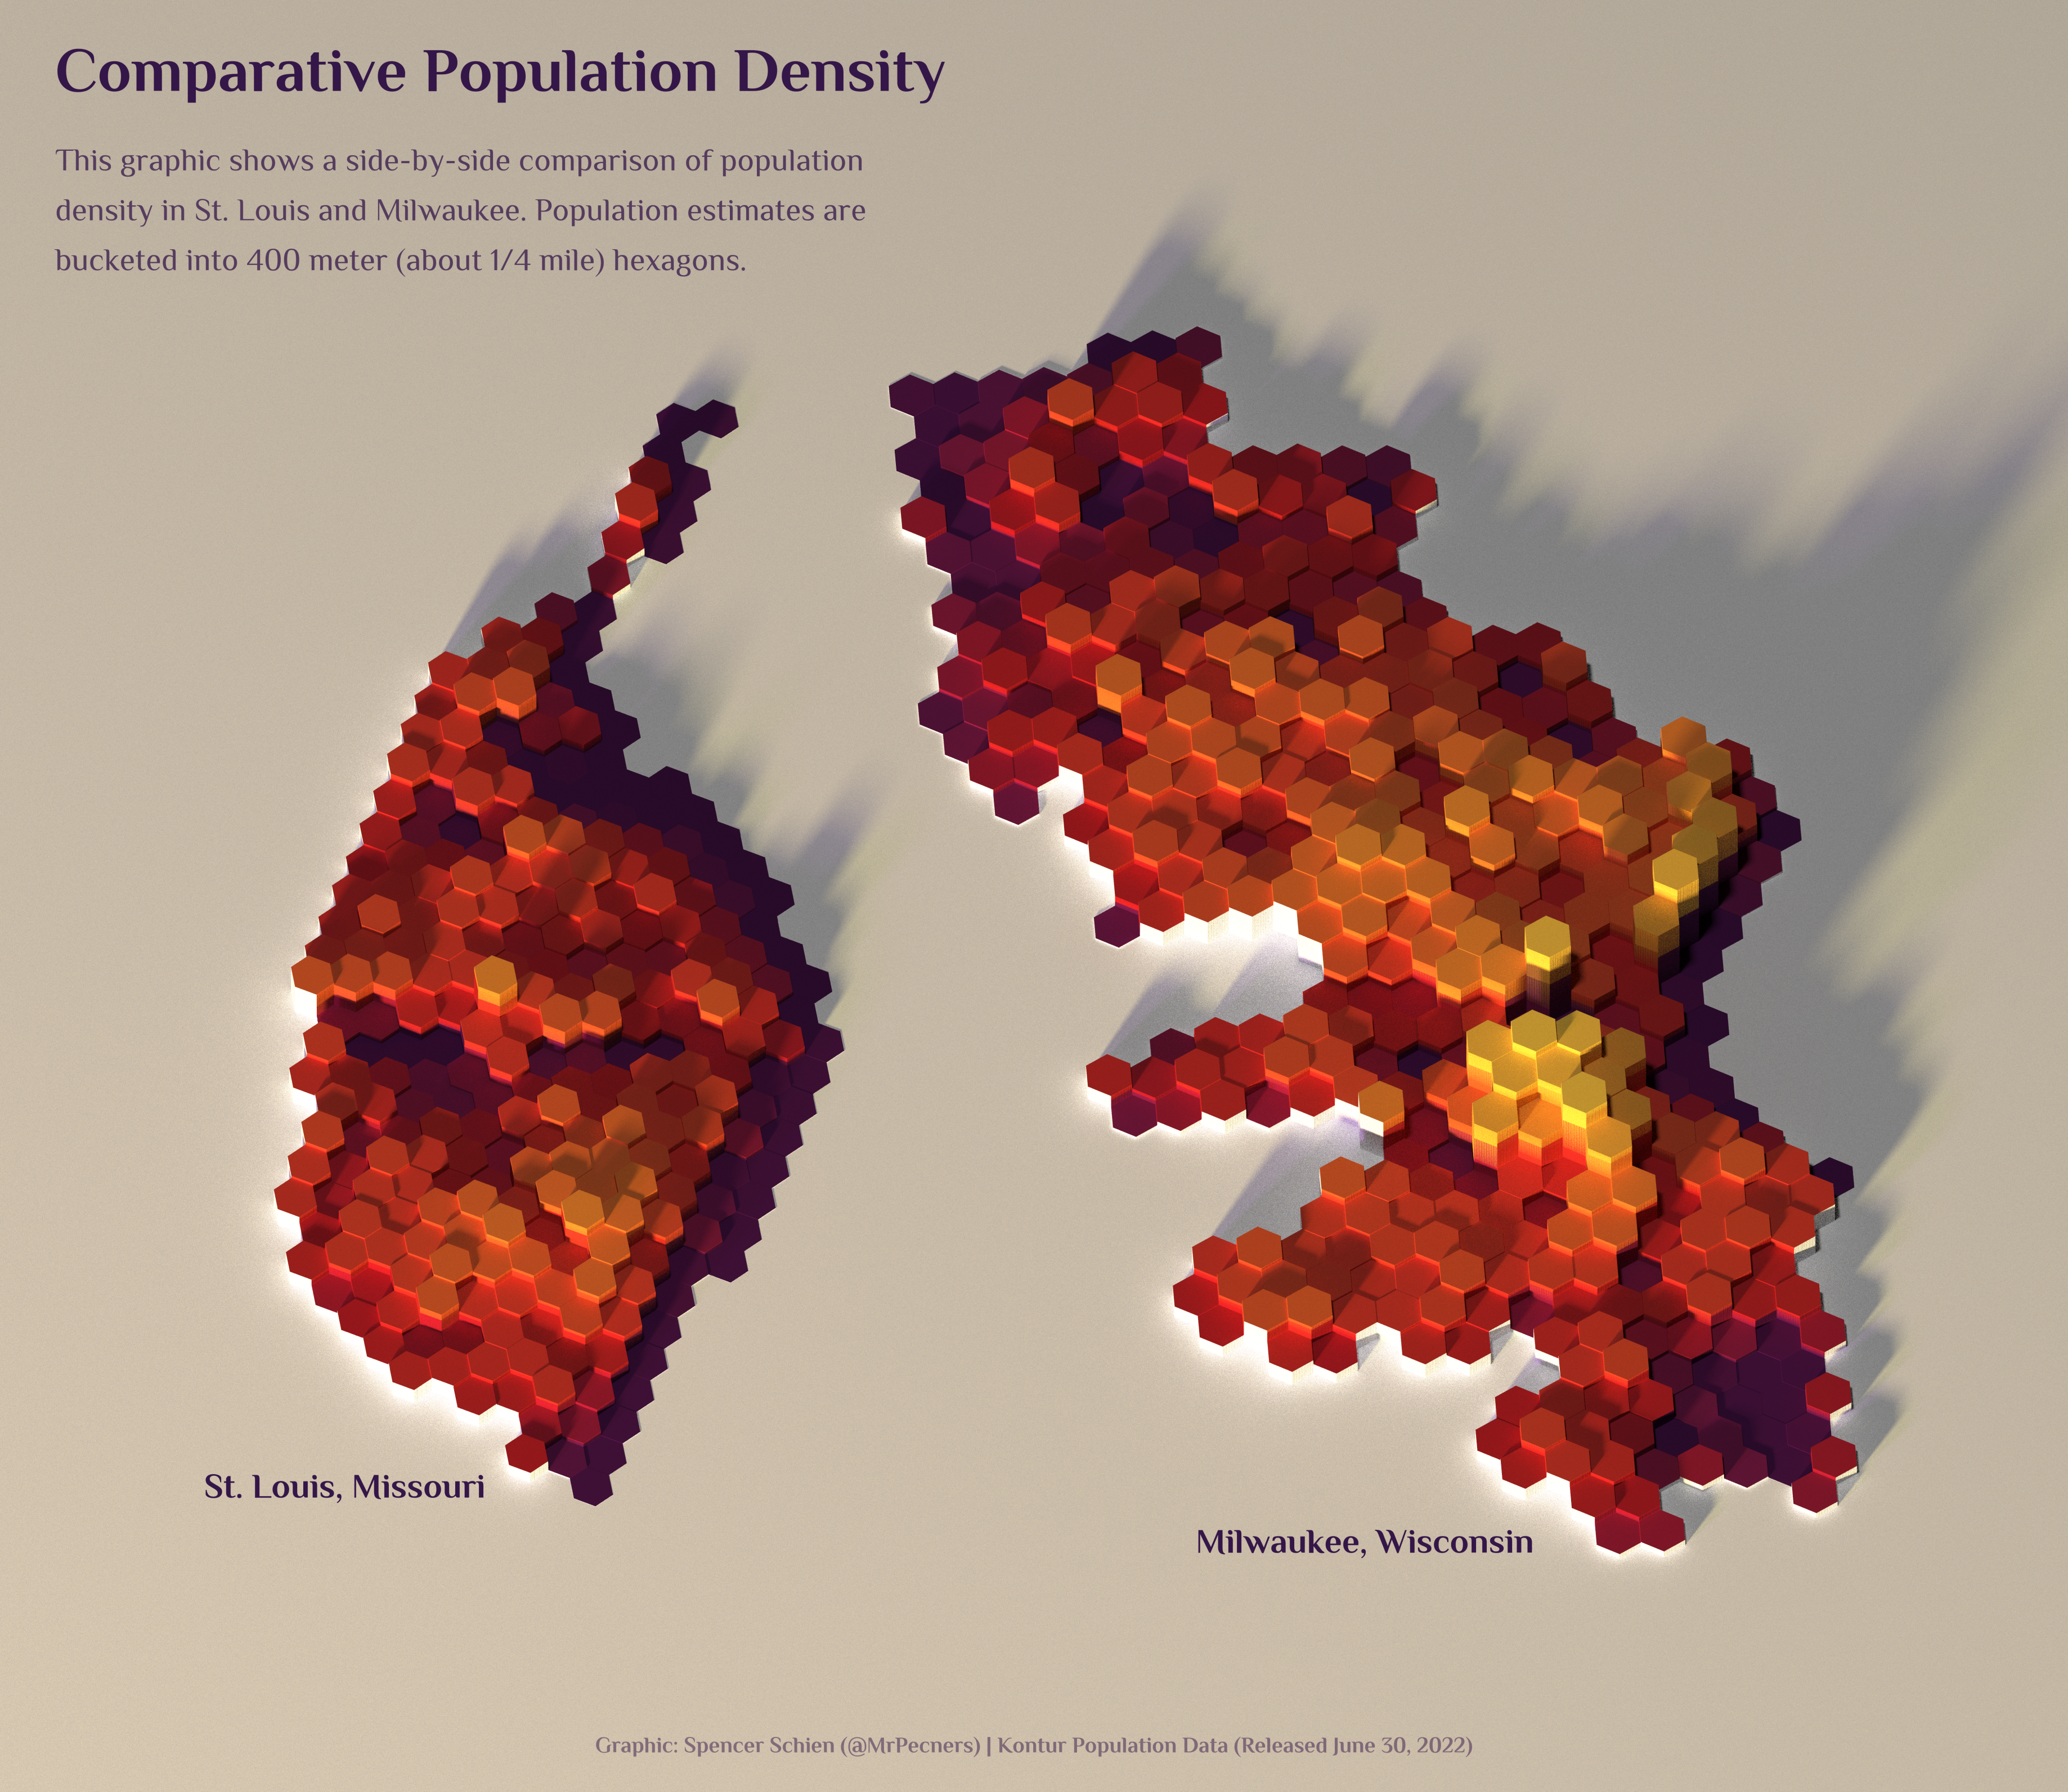 Comparative Population Density: St. Louis and Milwaukee